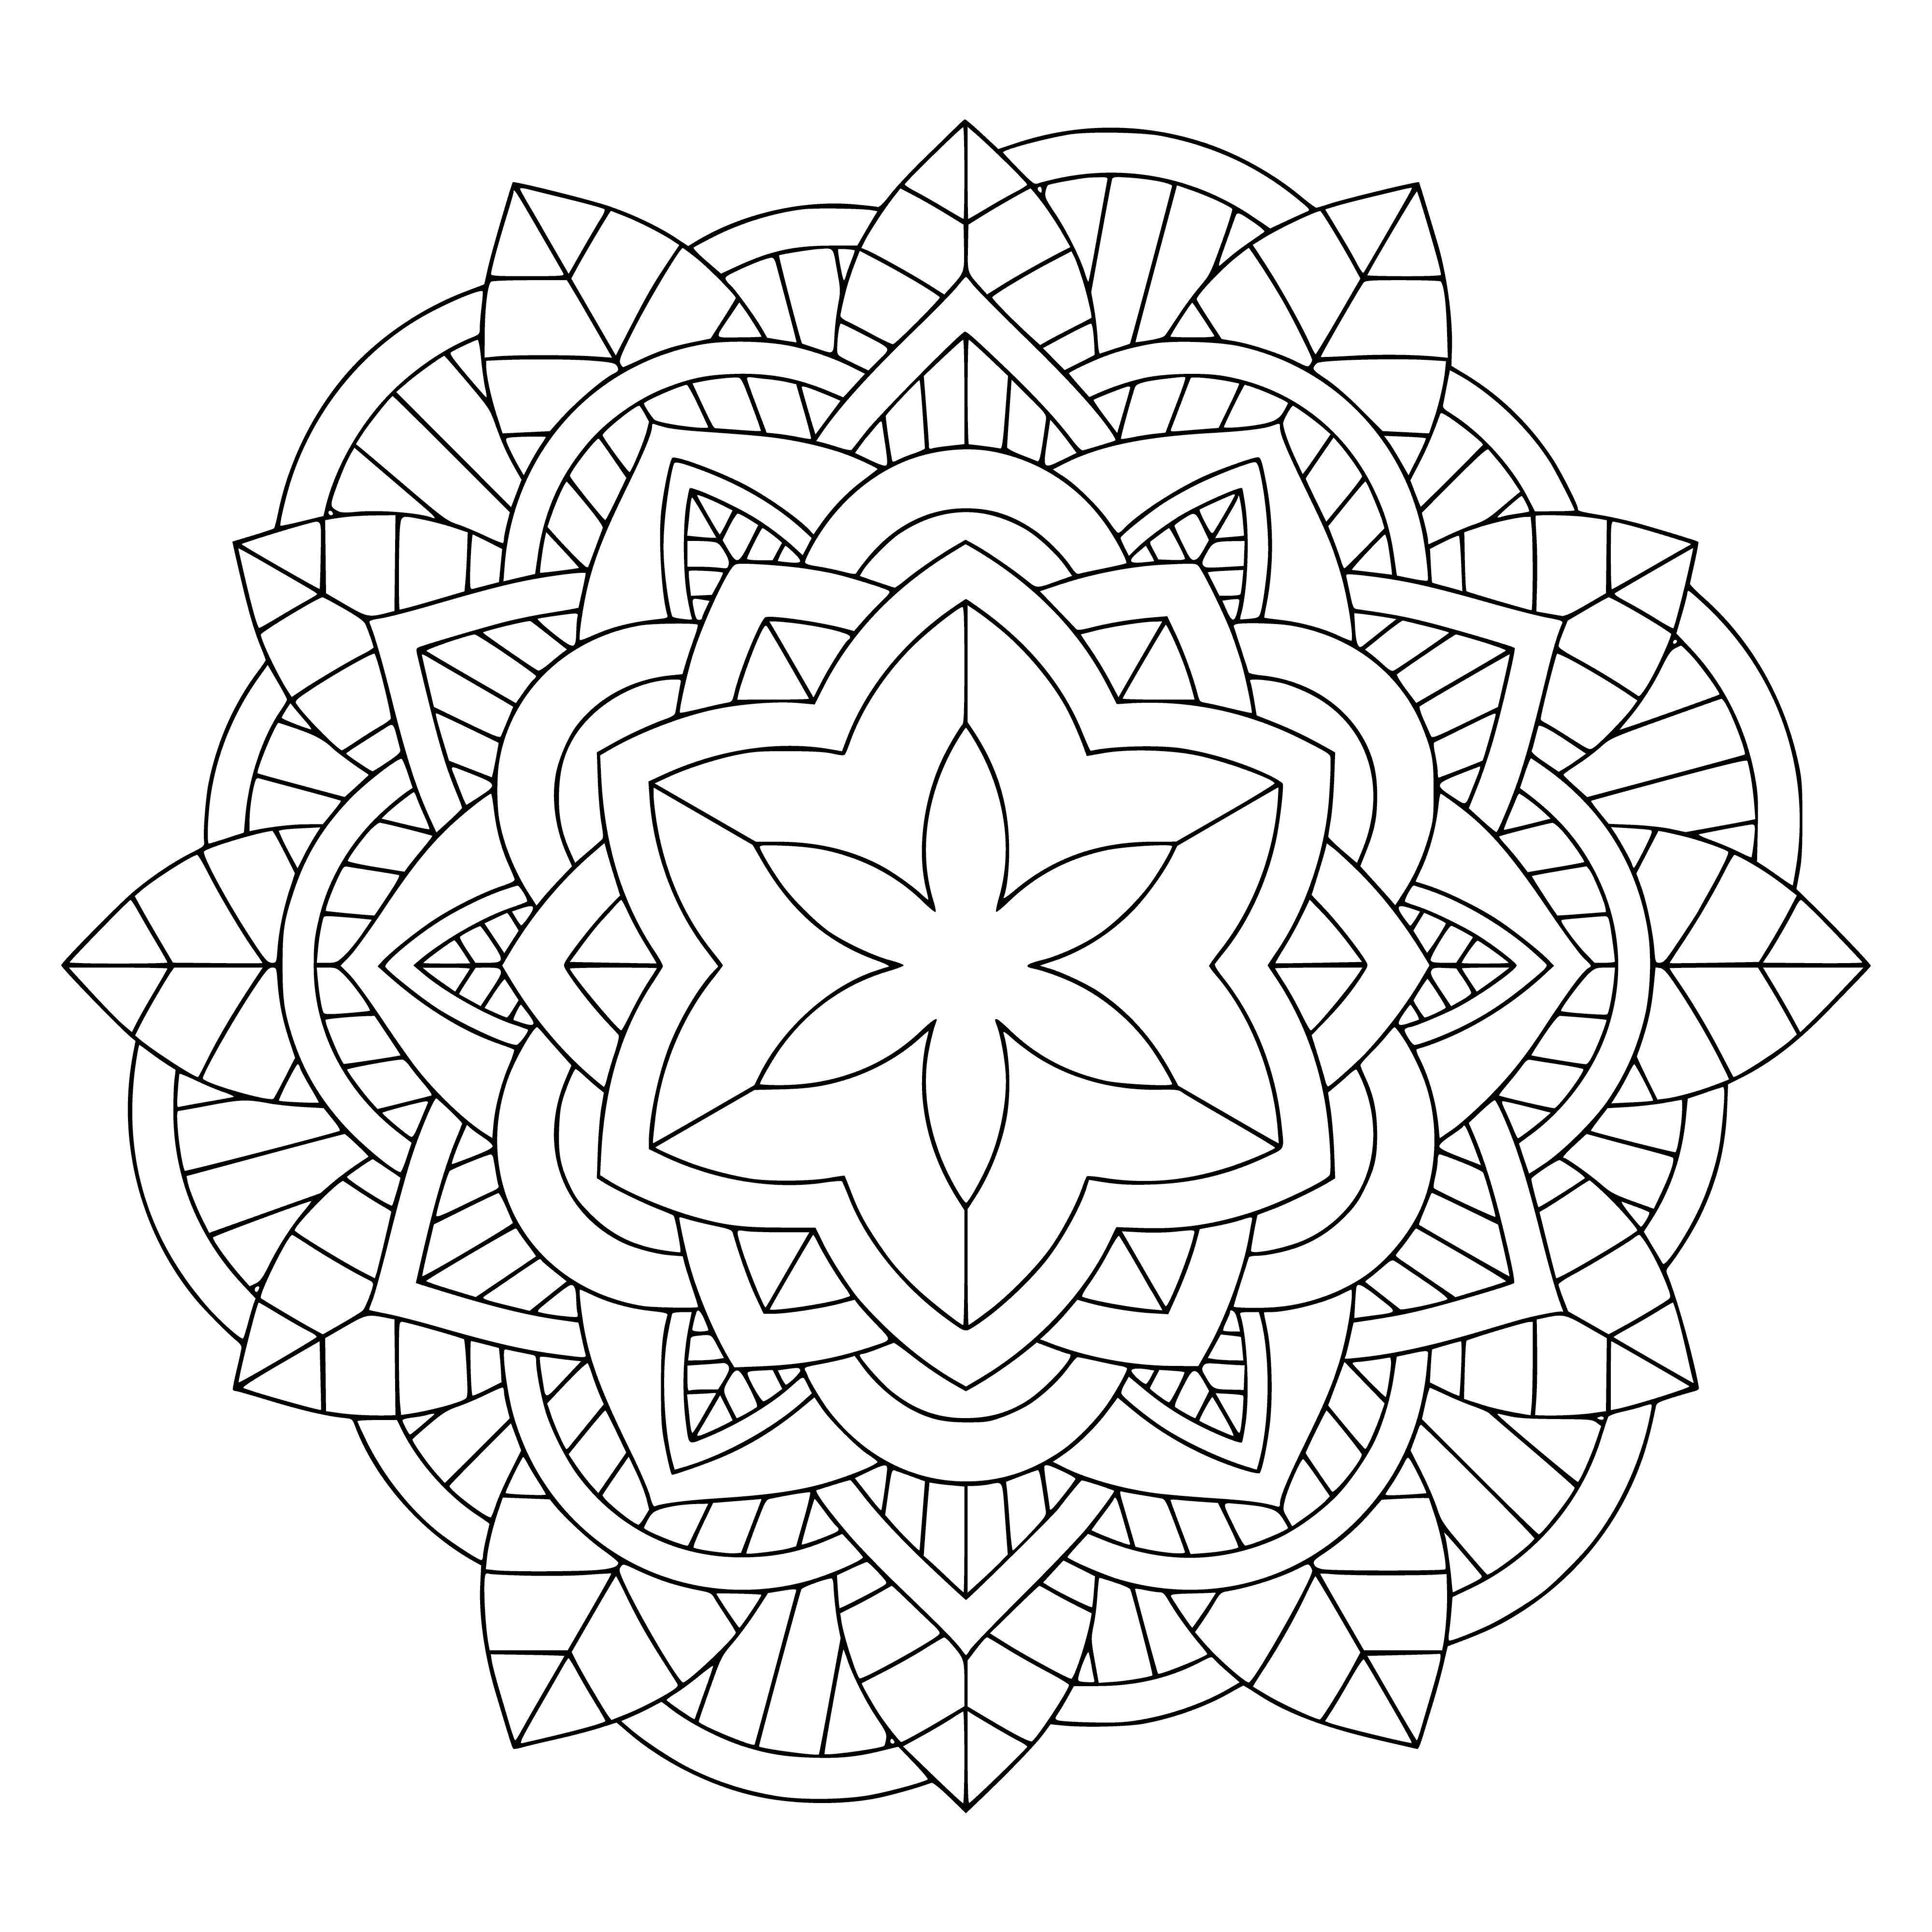 coloring page: This mandala coloring page features vibrant colors and intricate patterns with a peaceful atmosphere. #coloring #mandala